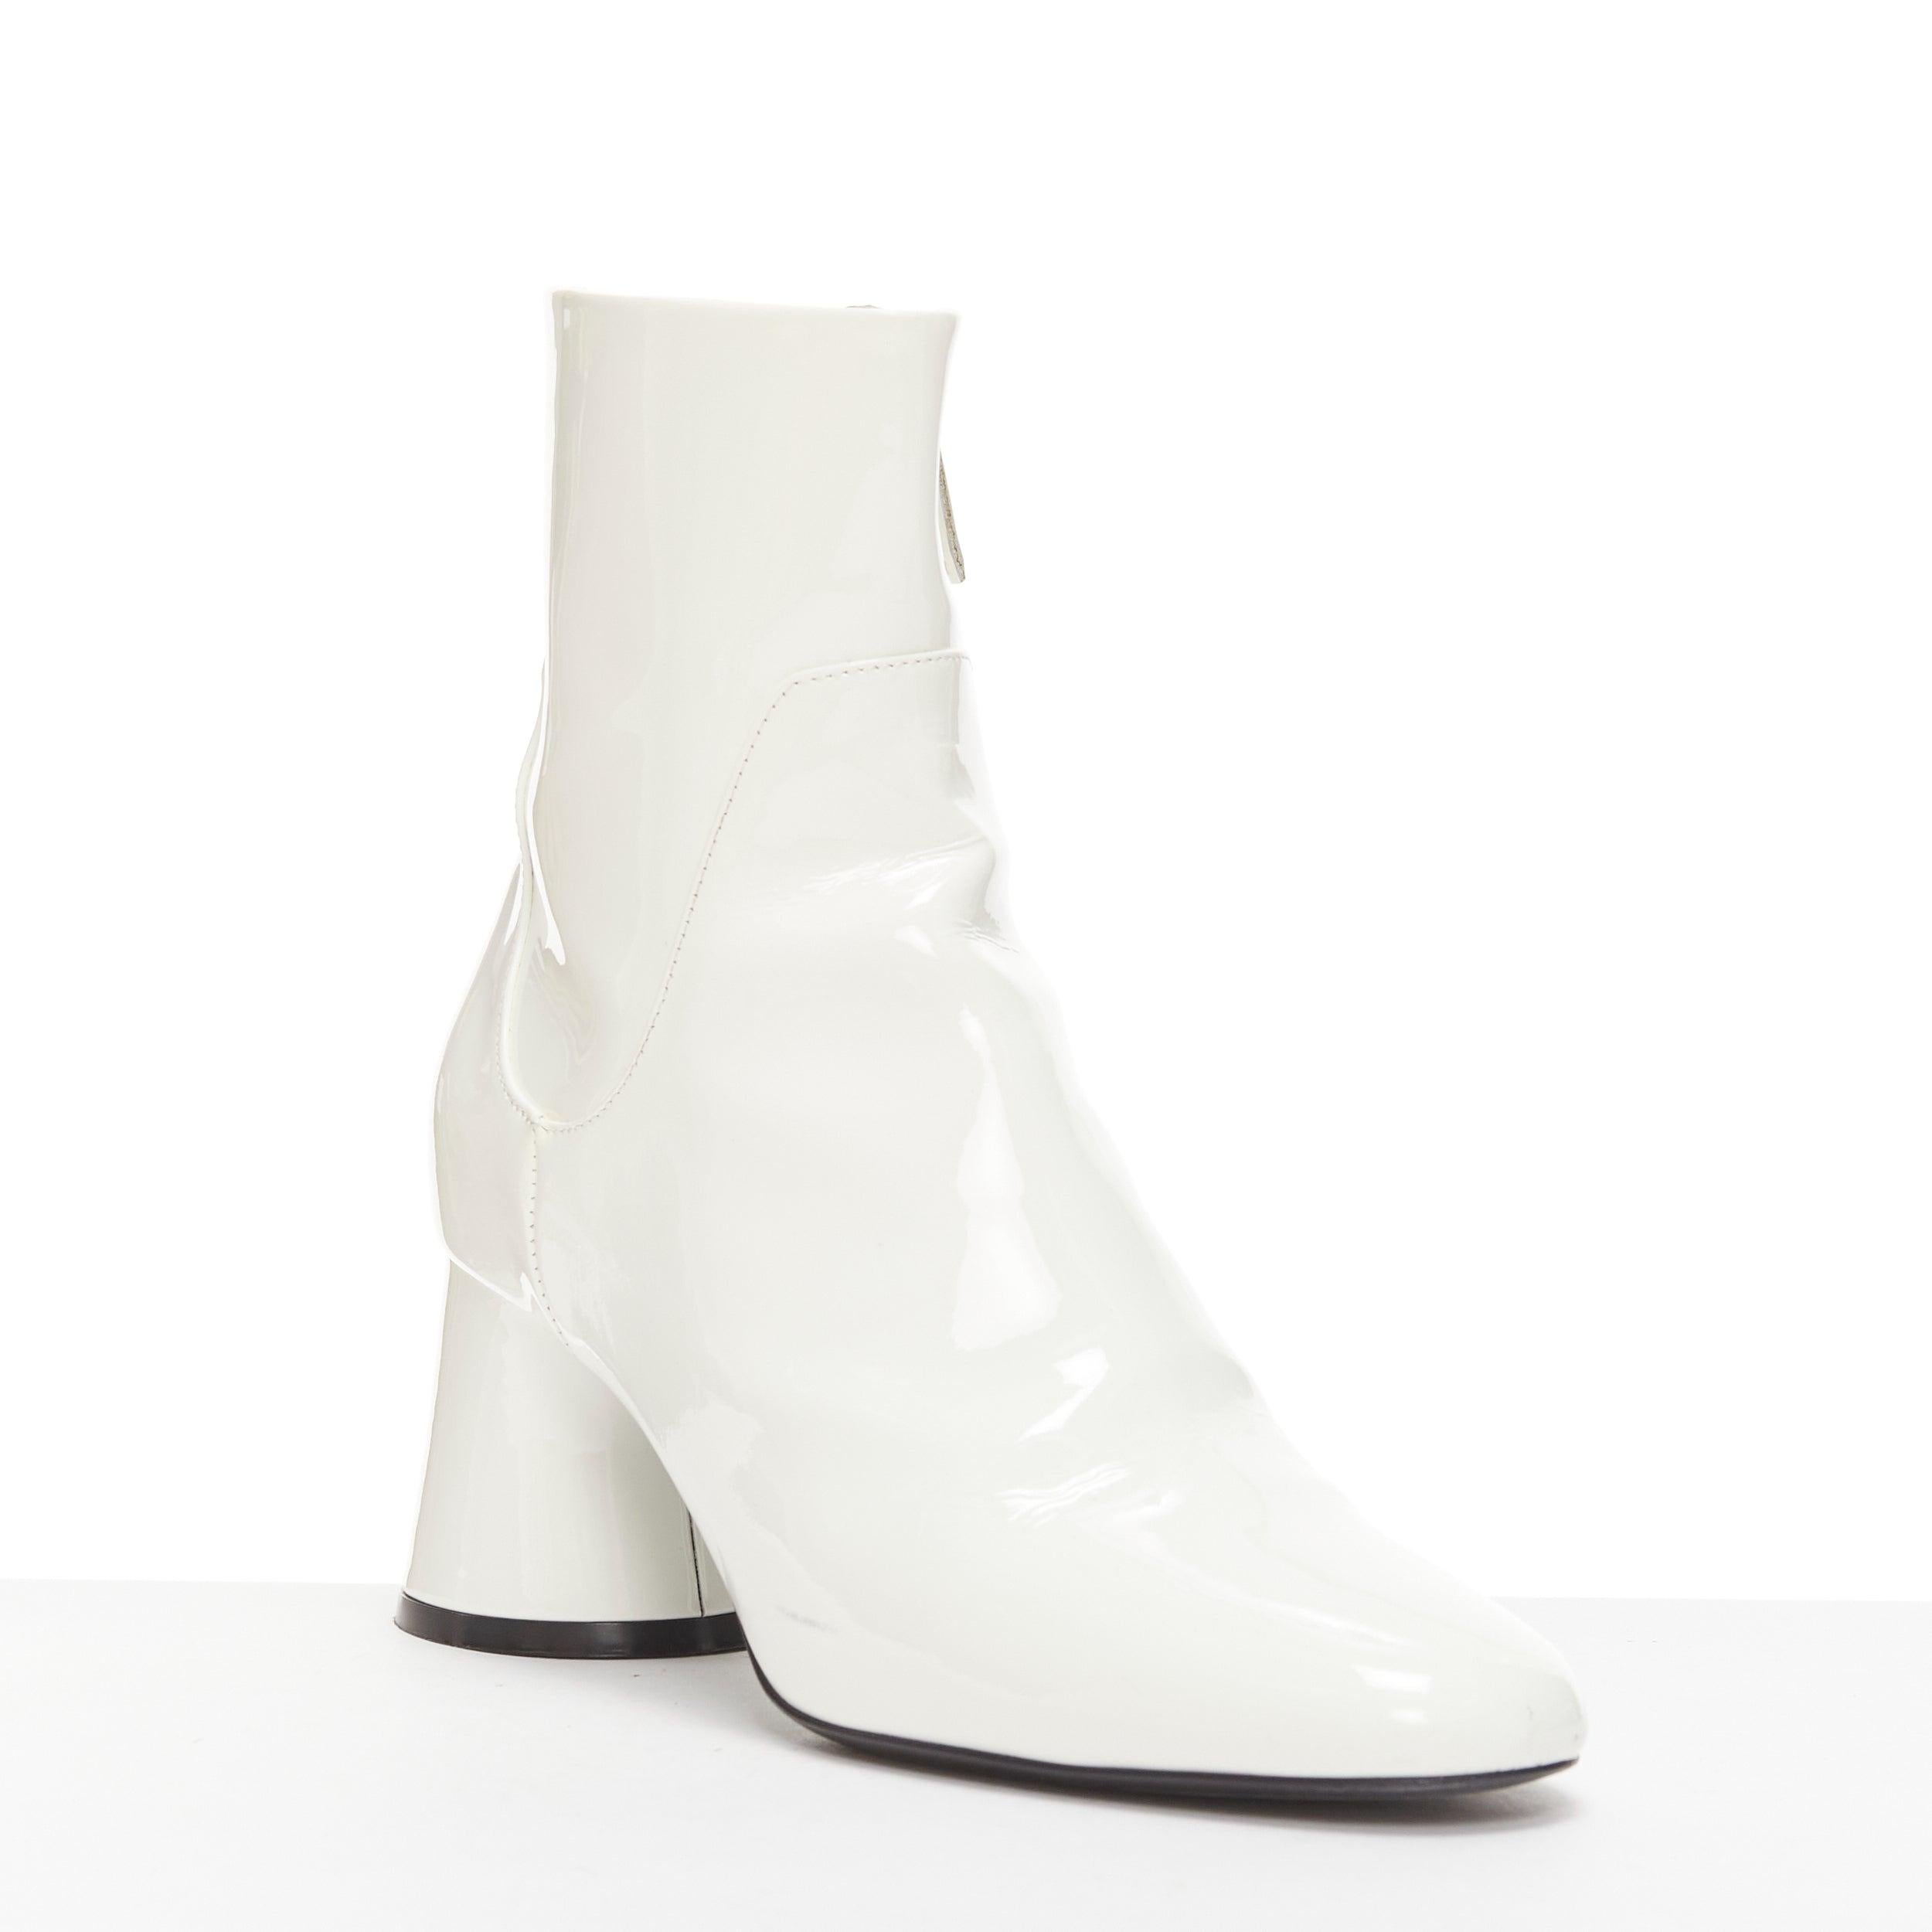 KHAITE Wythe 65 white patent leather chunky heel gogo boots EU37
Reference: KYCG/A00040
Brand: Khaite
Model: Wythe 65
Material: Patent Leather
Color: White
Pattern: Solid
Closure: Zip
Lining: White Leather
Extra Details: Chunky curved heels.
Made